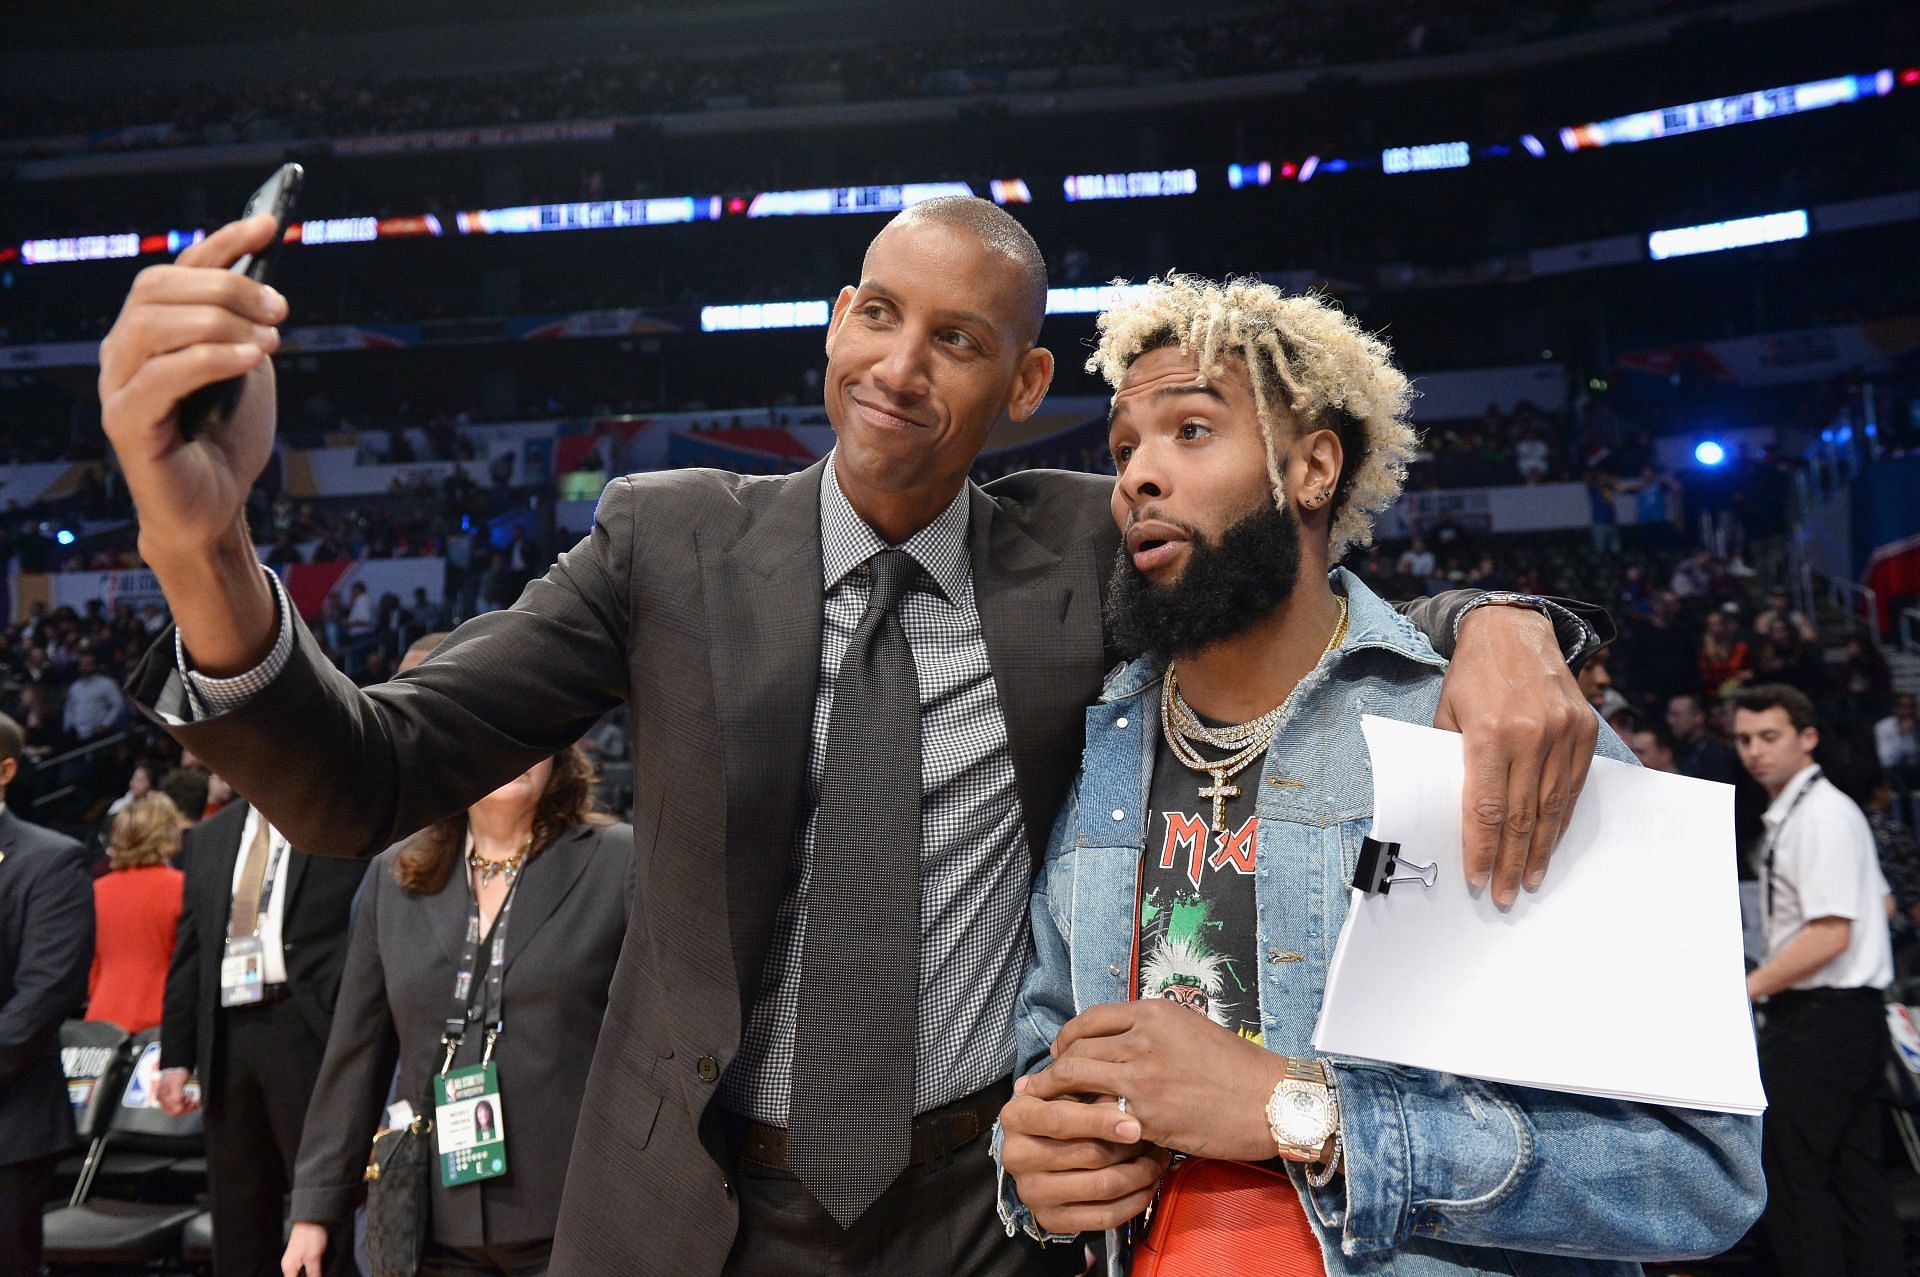 Reggie Miller and Odell Beckham Jr. attend the NBA All-Star Game 2018 at Staples Center on February 18, 2018 in Los Angeles, California.